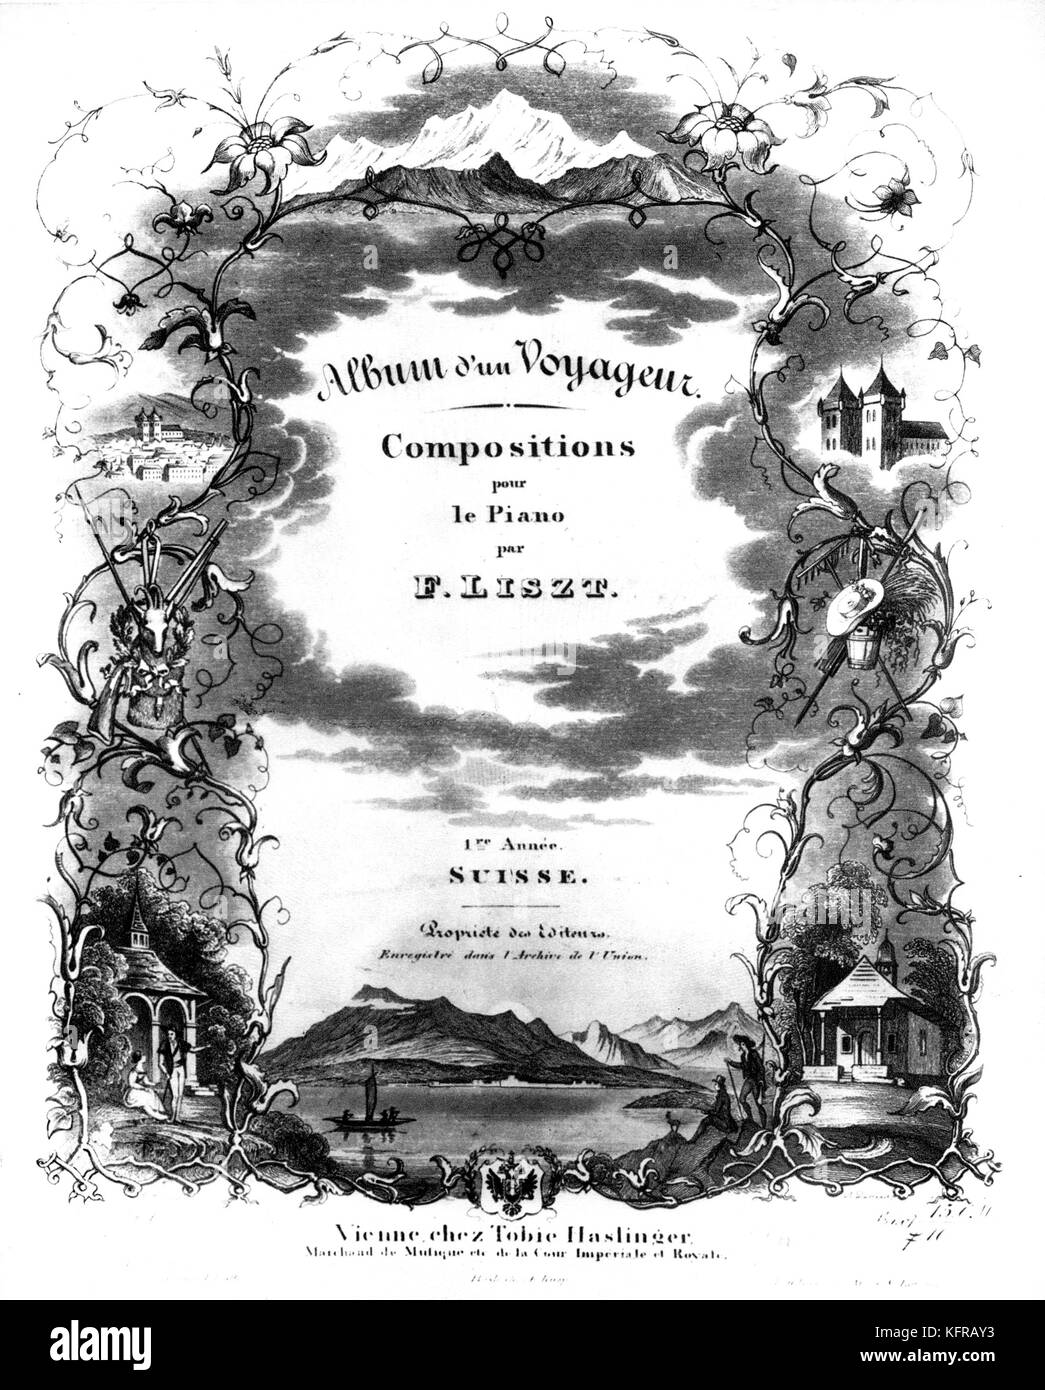 Album d'un voyageur score cover - by Franz Liszt. Piano compositions. Published 1842 by Haslinger, Vienna, Austria.  FL: Hungarian pianist and composer,  22 October 1811 - 31 July 1886. Stock Photo